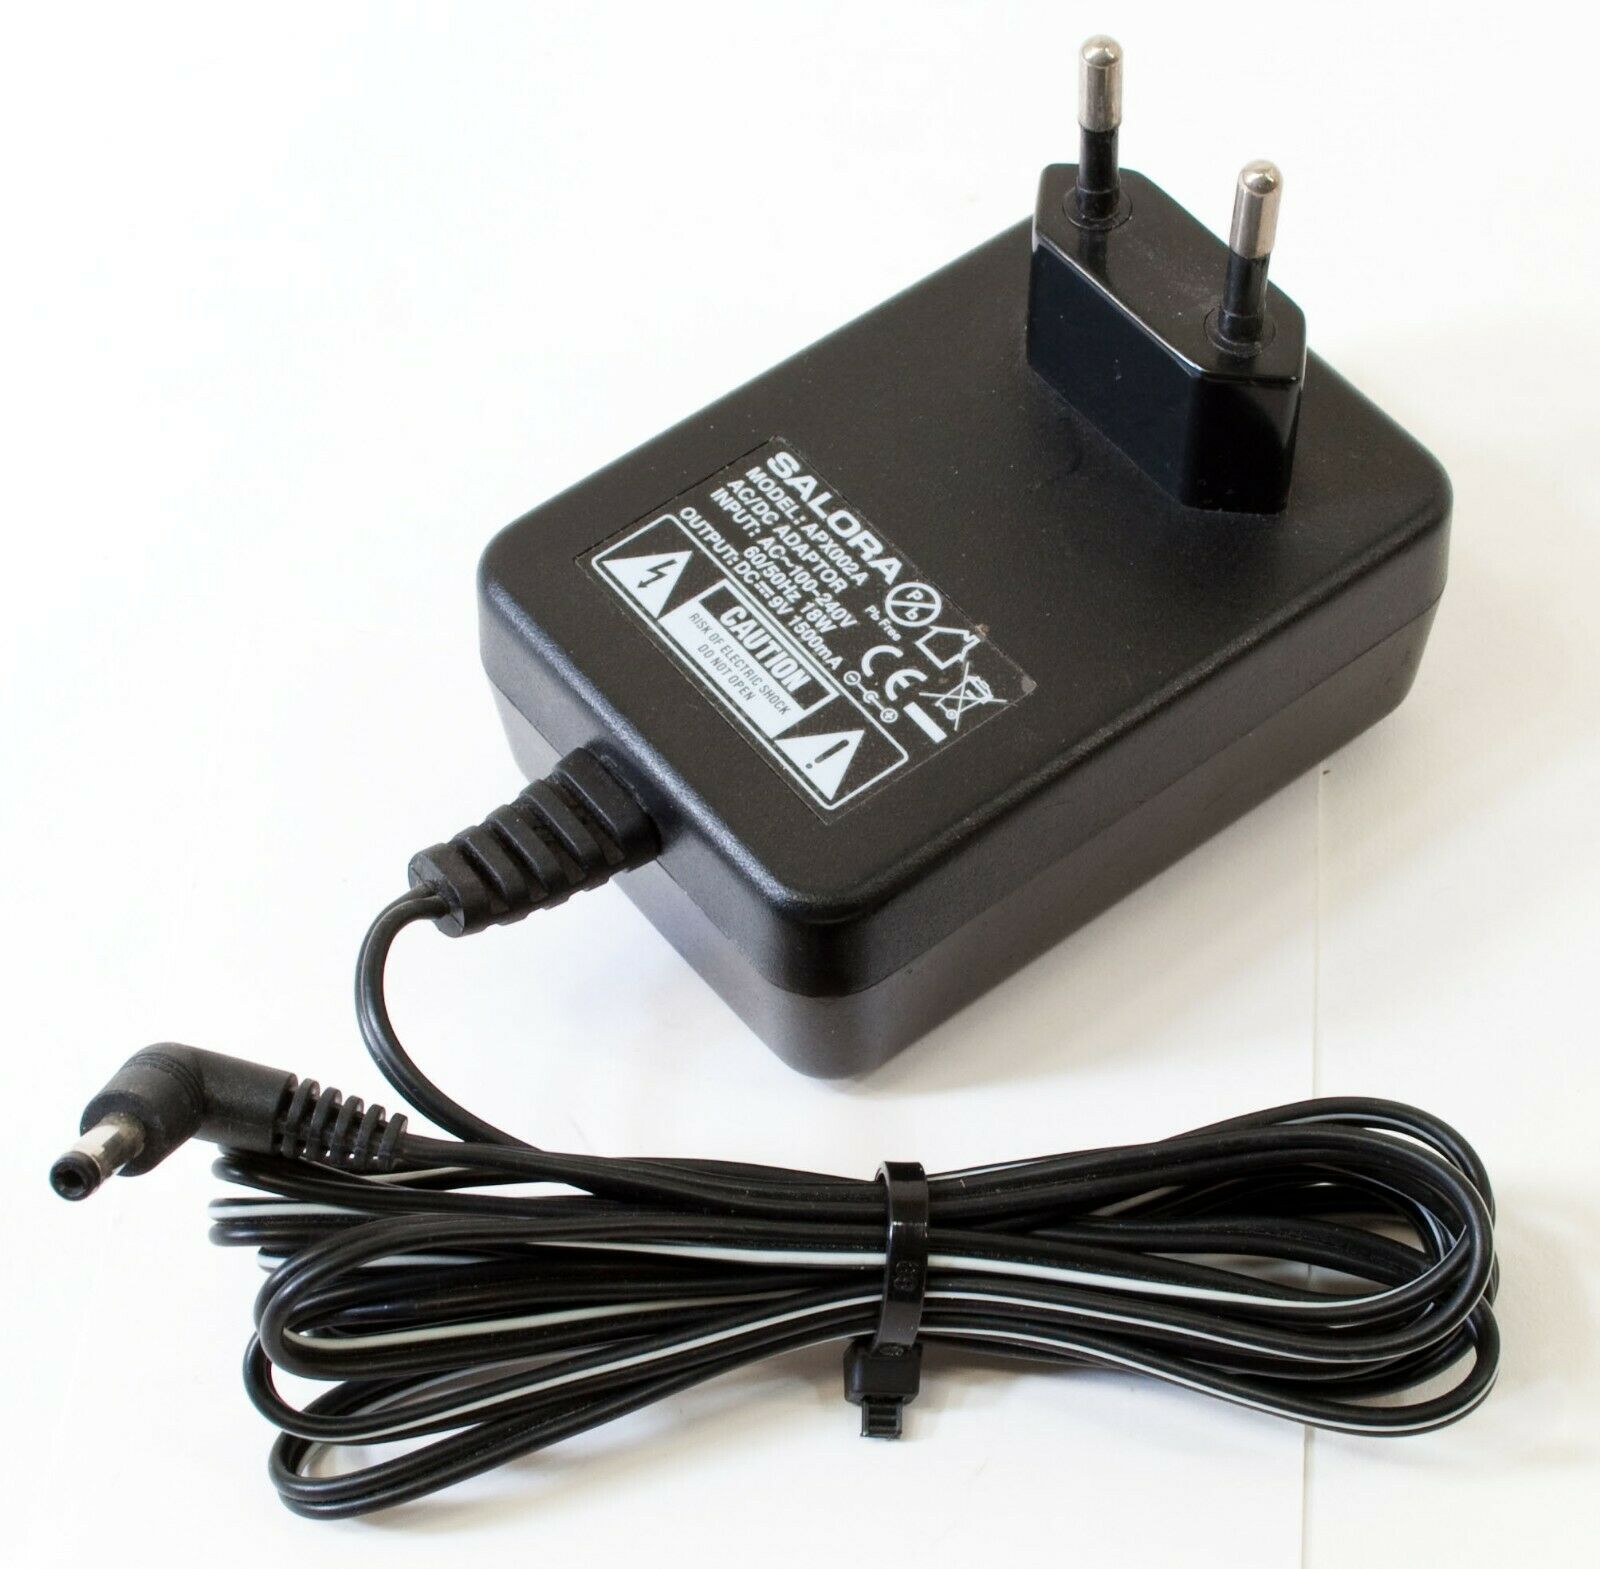 Salora APX002A AC Adapter 9V 1500mA Original Charger Power Supply Brand: Salora Compatible Brand: For Salora Type: Pow